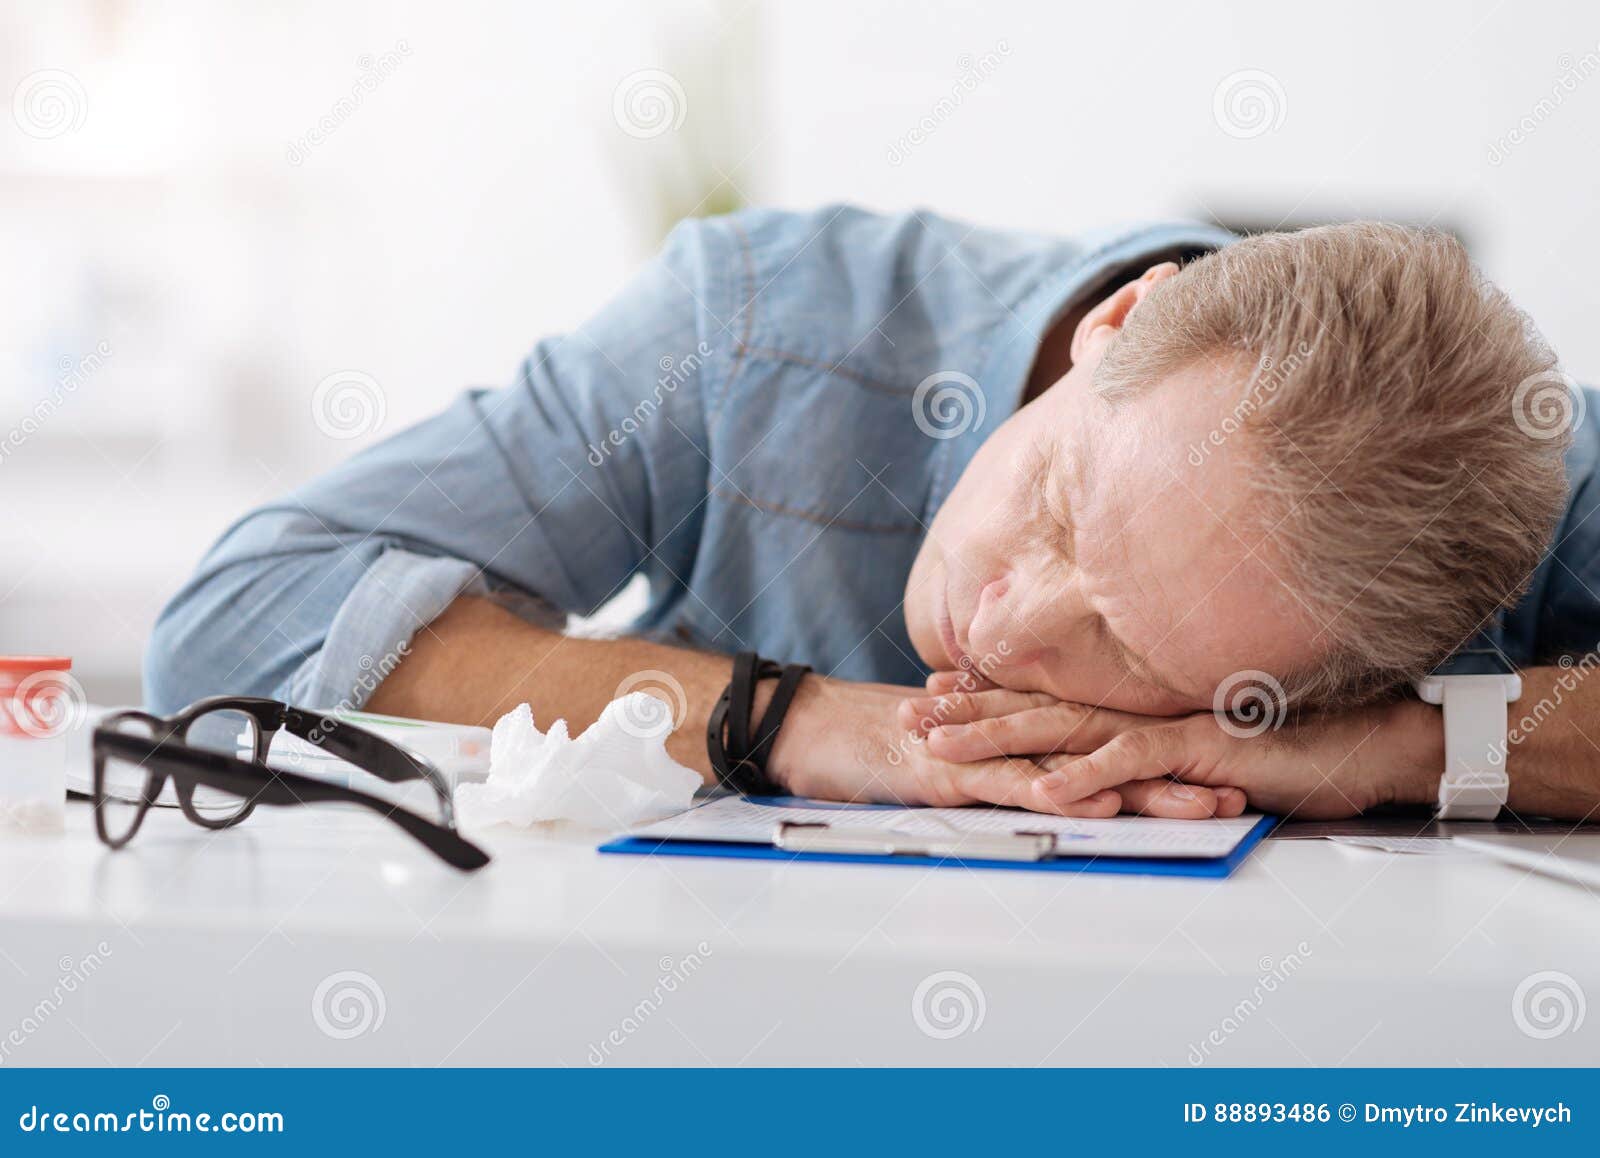 Worn Out Person Sleeping At Workplace Stock Photo Image Of